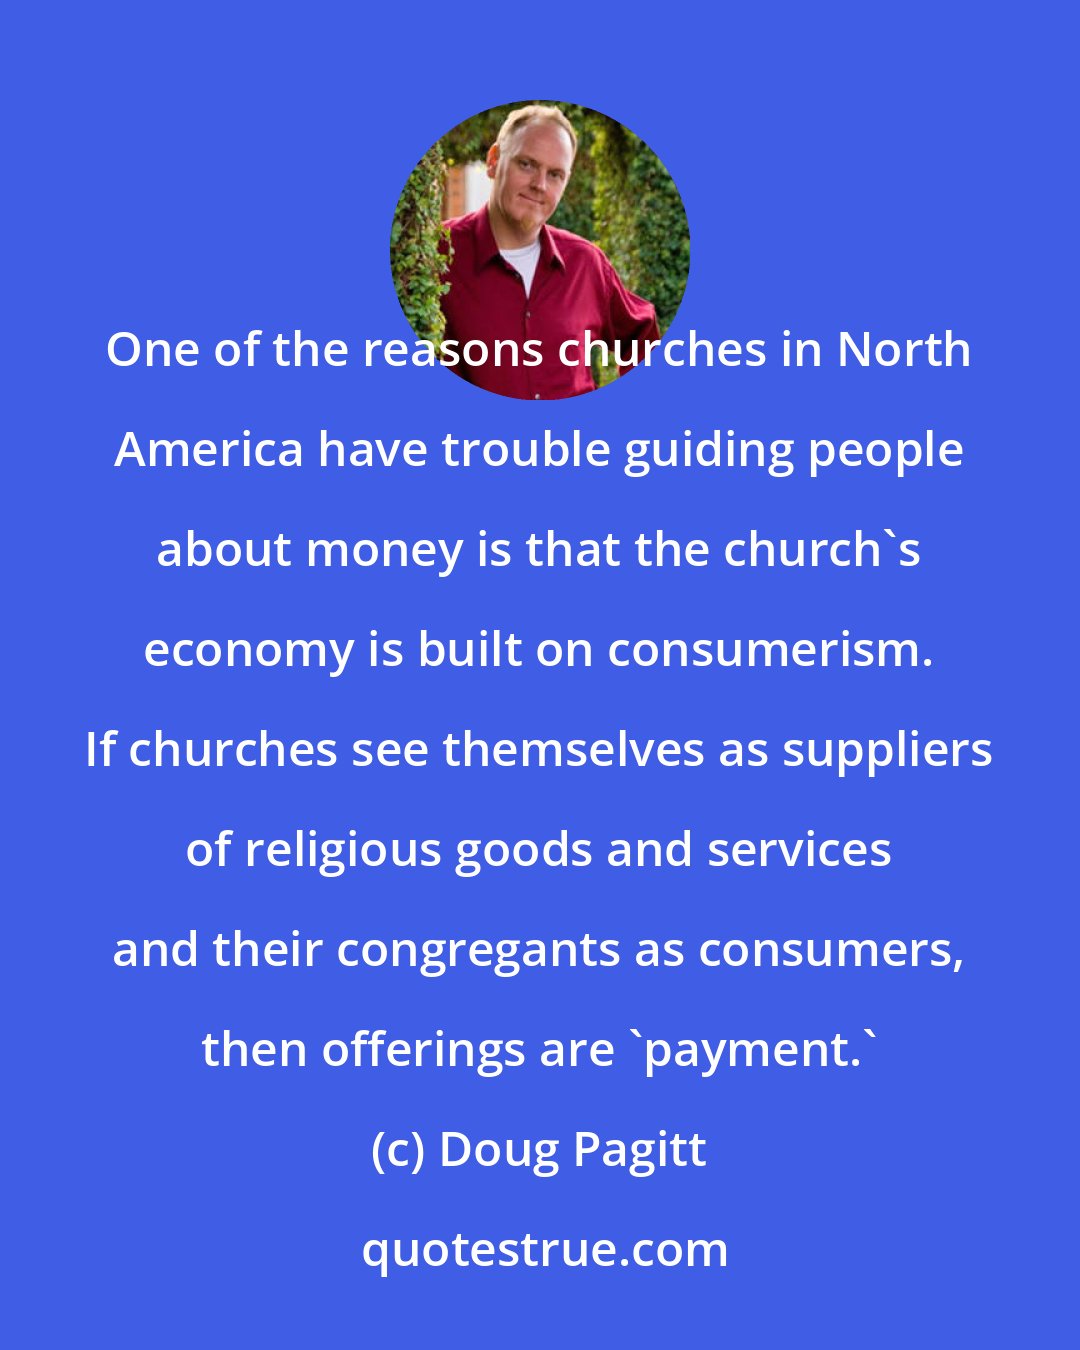 Doug Pagitt: One of the reasons churches in North America have trouble guiding people about money is that the church's economy is built on consumerism. If churches see themselves as suppliers of religious goods and services and their congregants as consumers, then offerings are 'payment.'